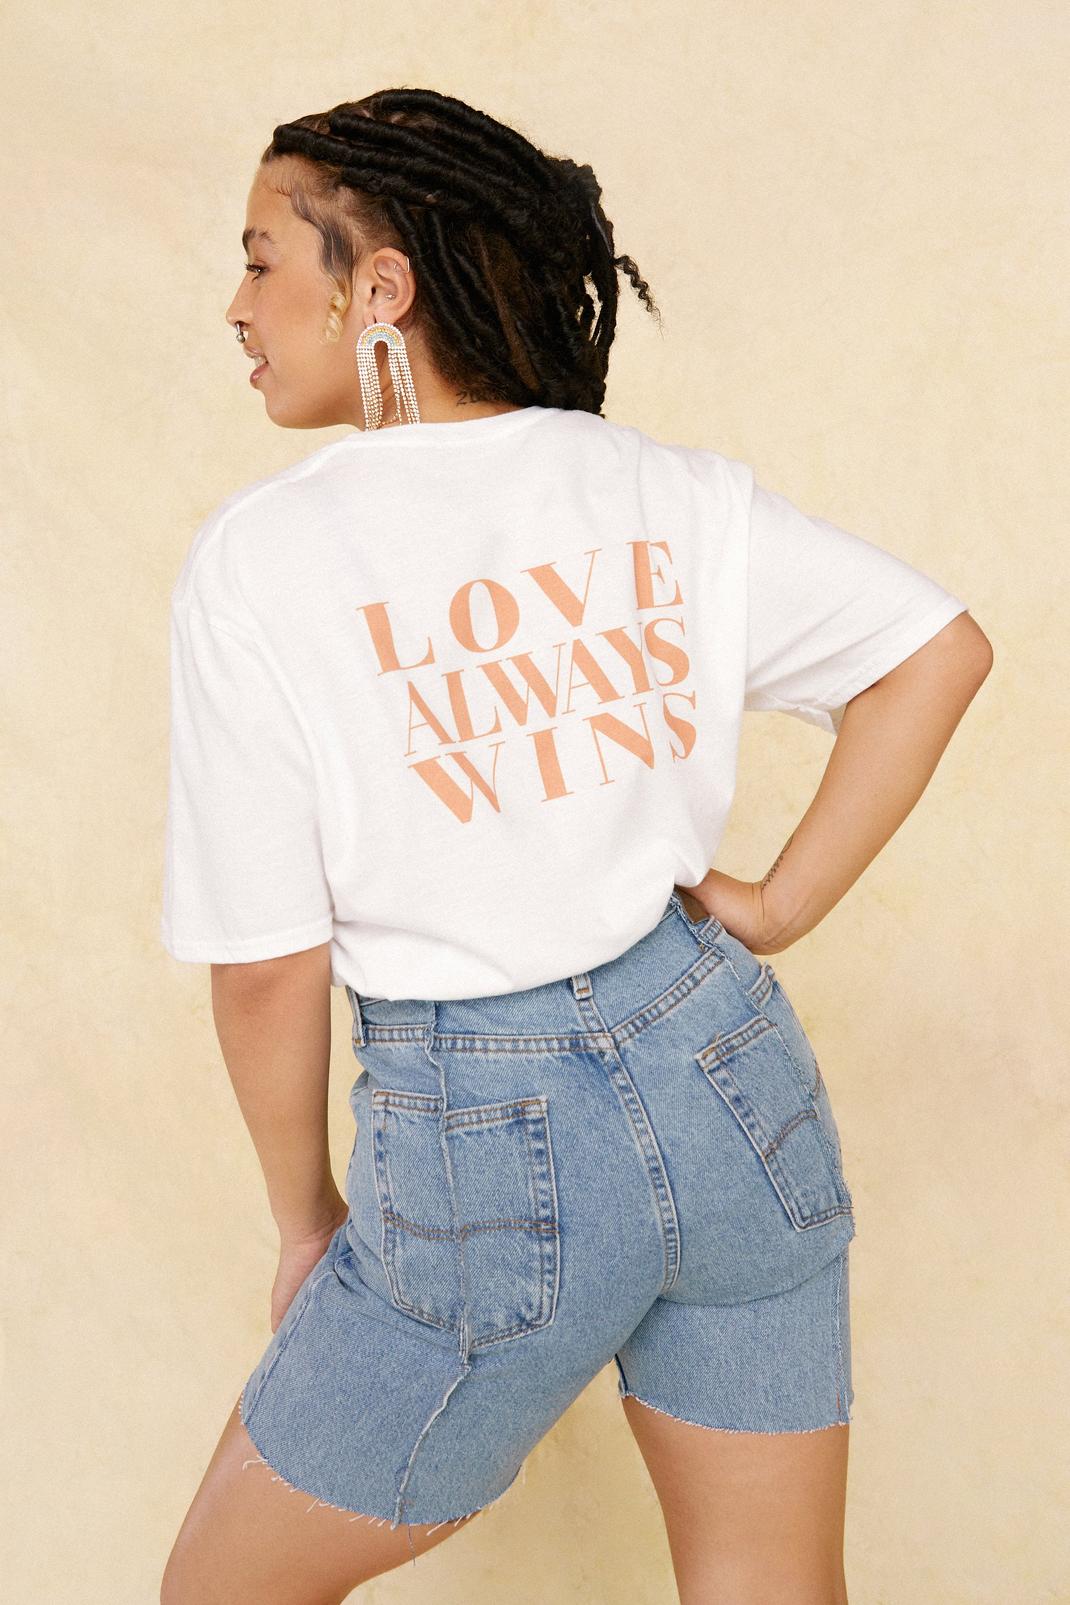 White Love Always Wins Graphic T-Shirt image number 1